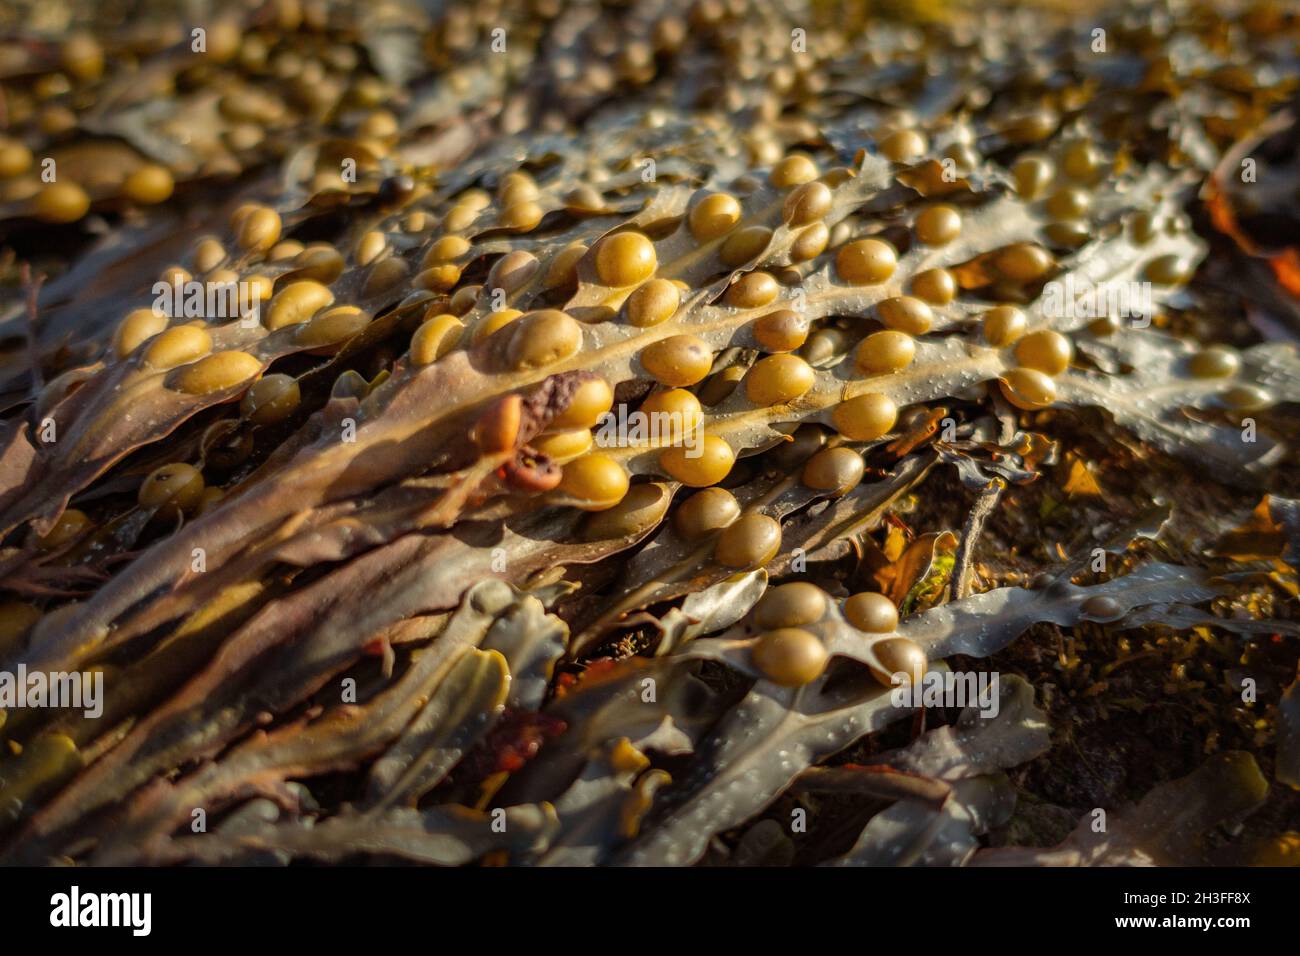 Close up of bladderwrack seaweed showing air vesicles Stock Photo